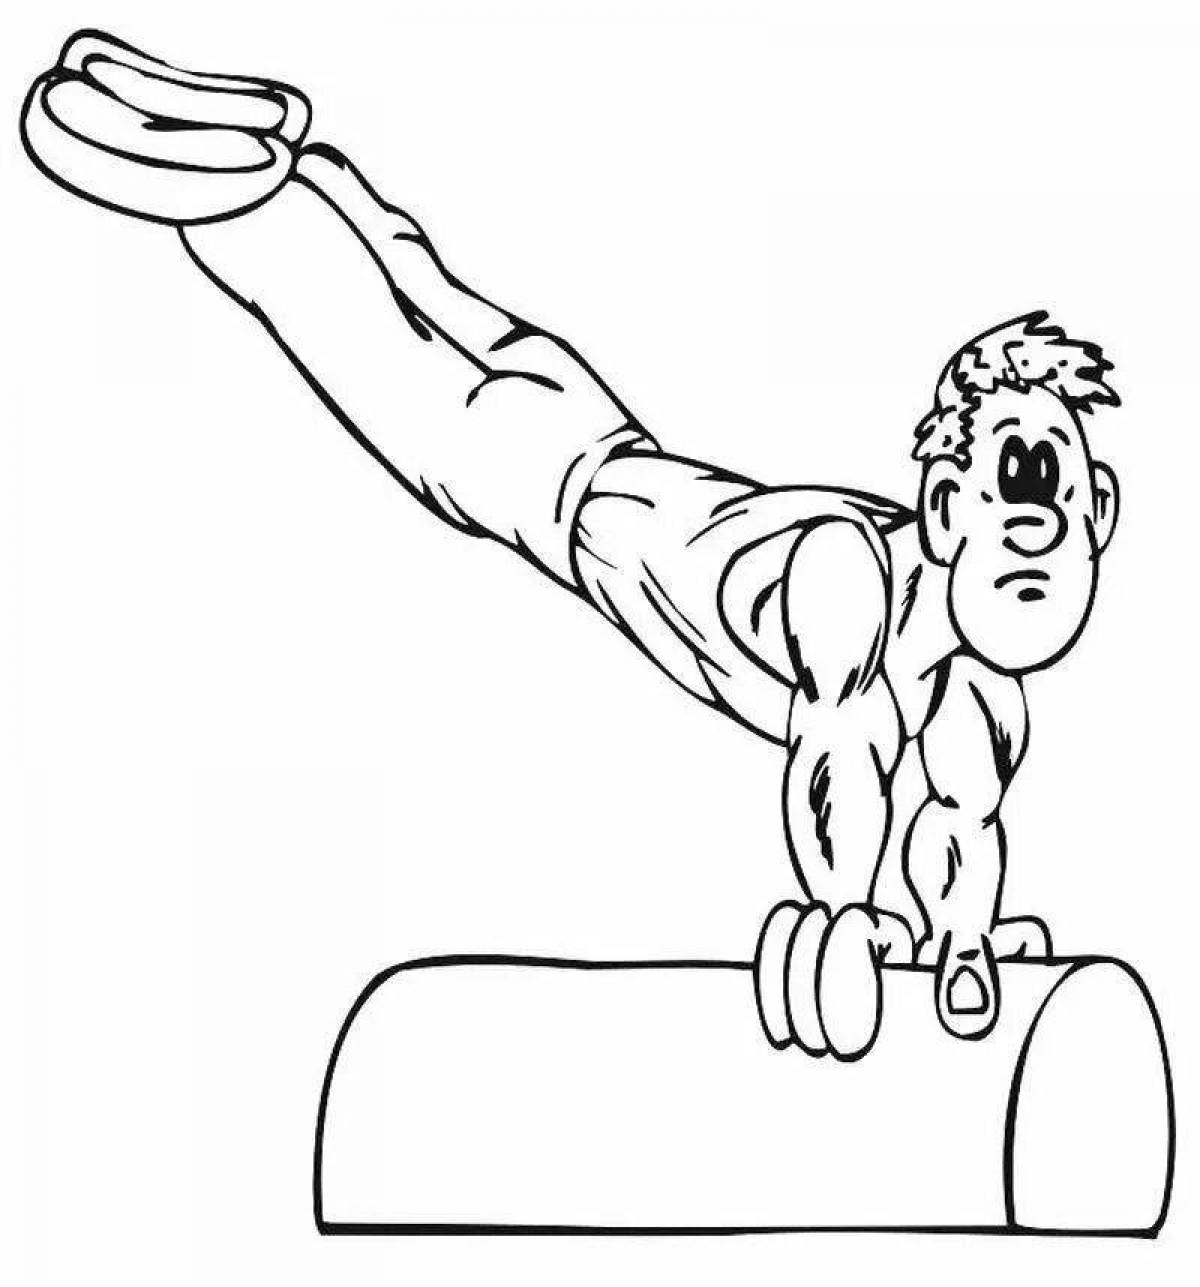 Brave athletes coloring pages